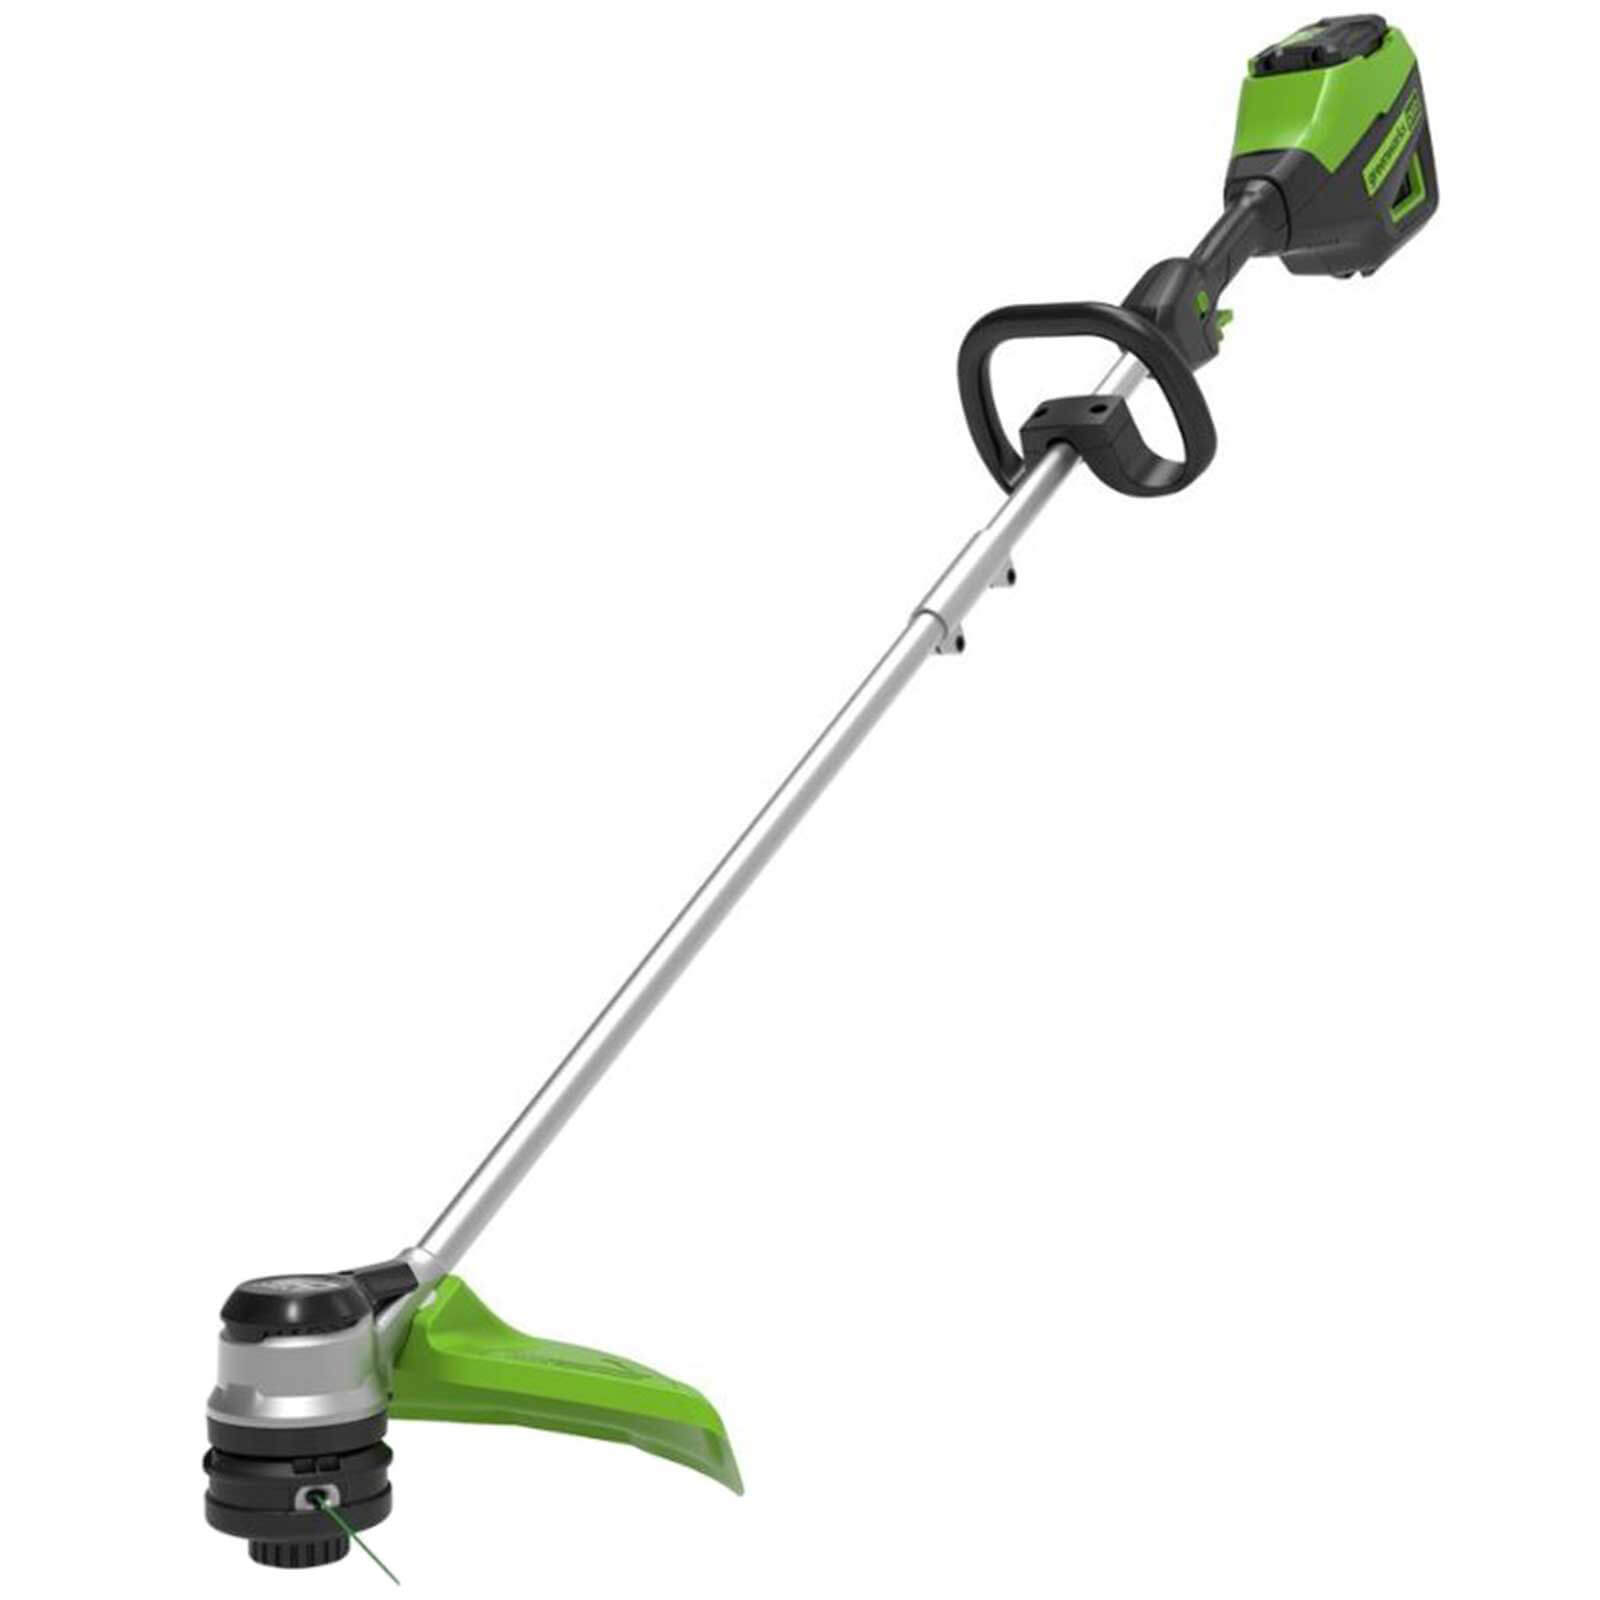 Greenworks GD60BC 60v Cordless Brushless Grass Trimmer with Loop Handle No Batteries No Charger